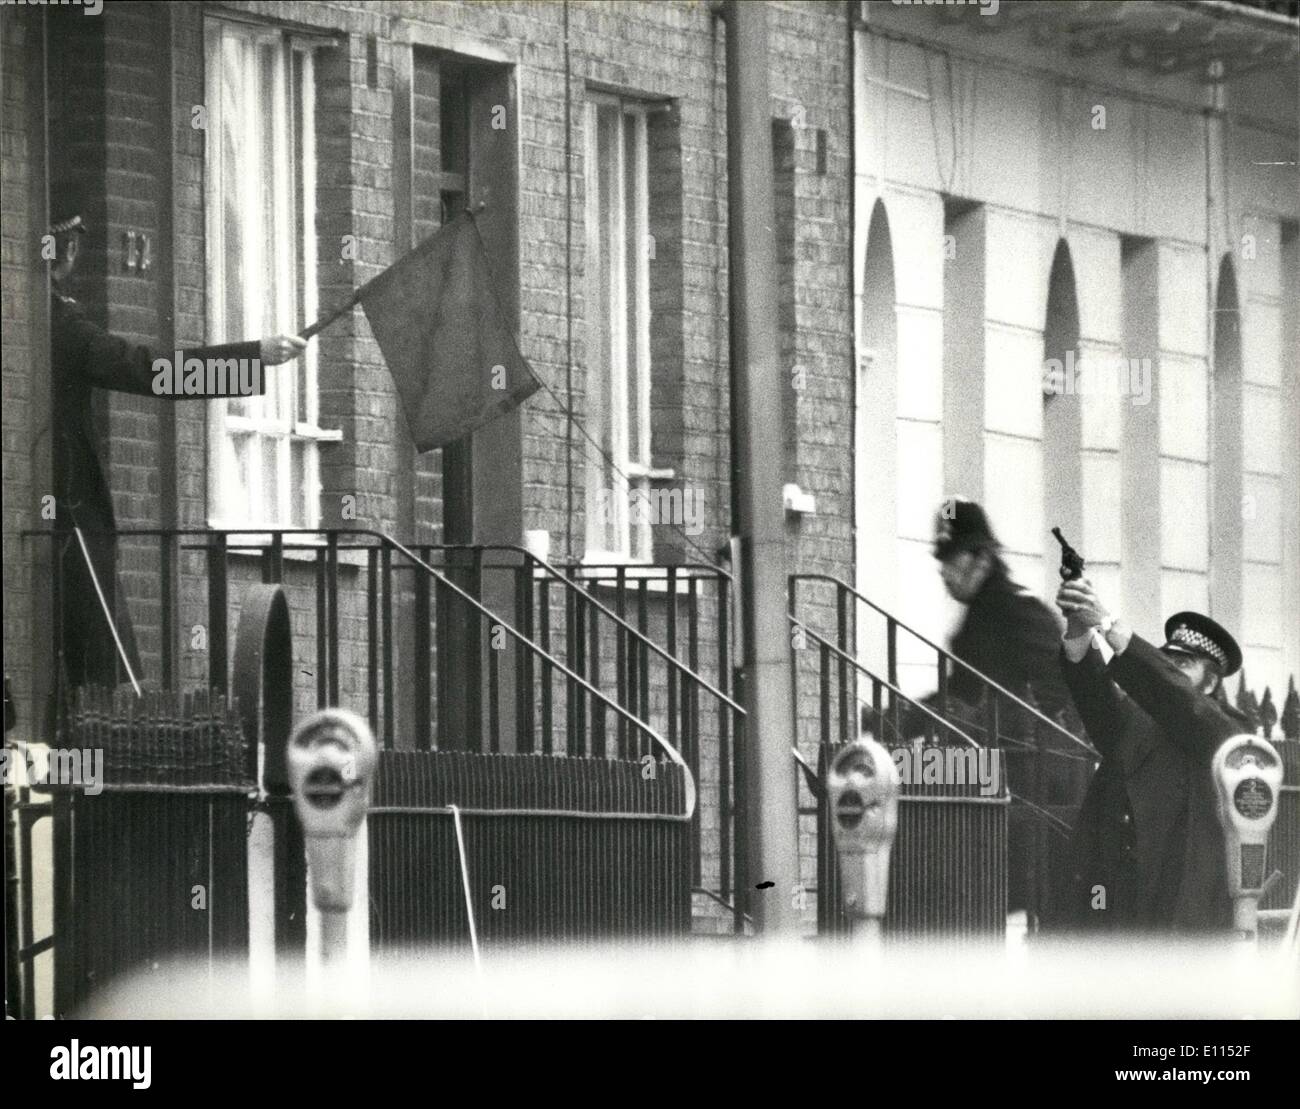 Dec. 10, 1975 - December 10th, 1975 Police use red and green flags as safety precaution at the scene of the London siege - The London siege in which IRA gunmen are holding middle-aged man and his wife hostage in their flat in Balcombe Street, Marylebone, entered into its fifth day today. In the street below police have now adopted a semaphore language by using two flags, one red and the other green which are used for officers entering or leaving the siege building Stock Photo